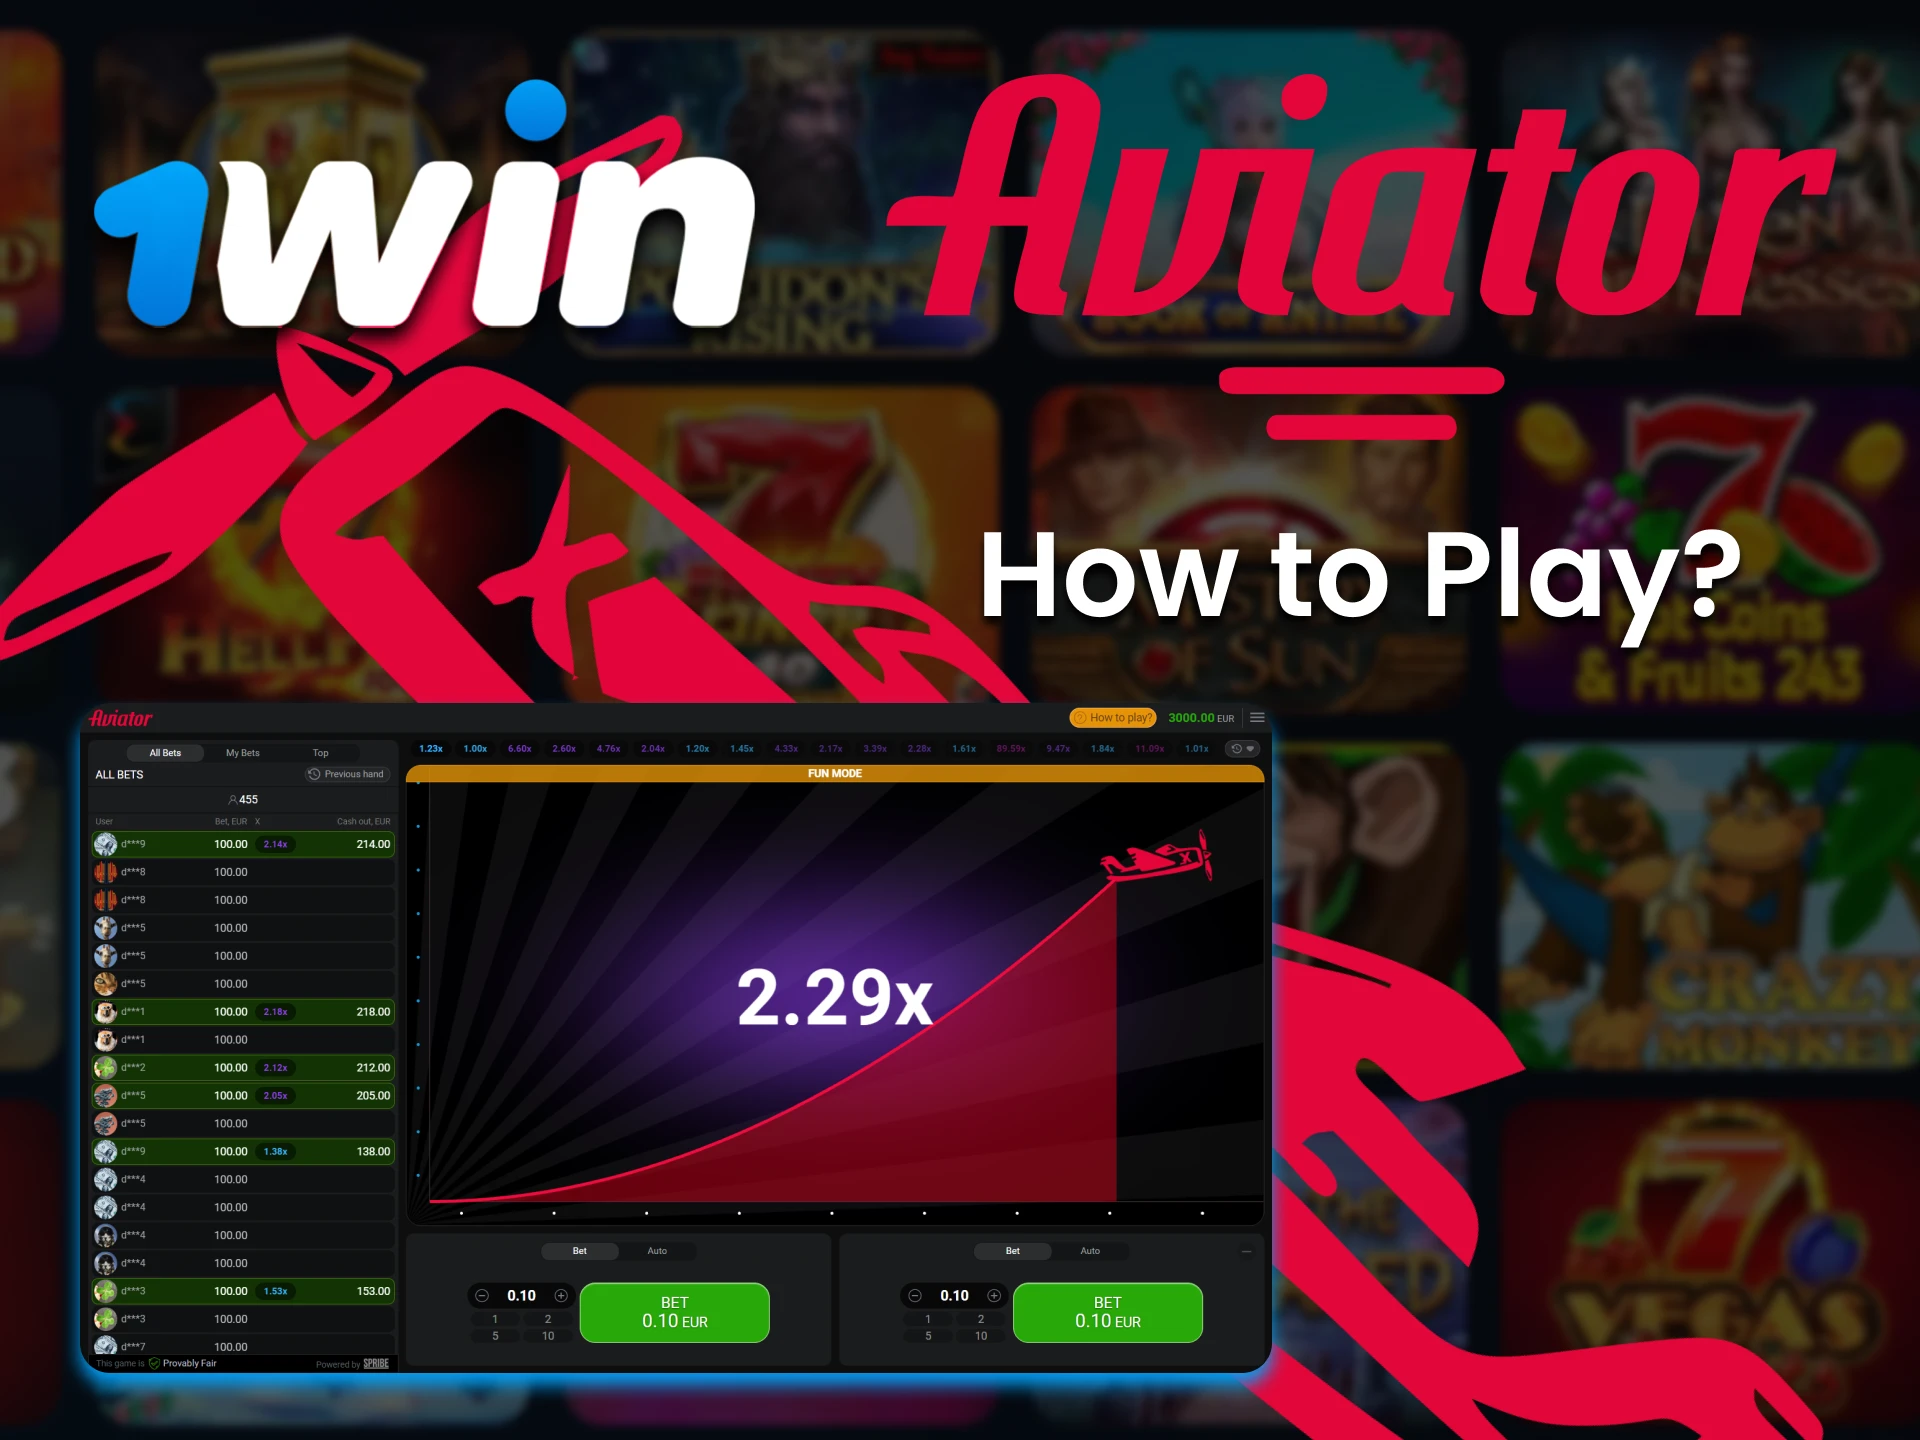 Register and choose Avaitor in the 1Win section to start playing the crash game.